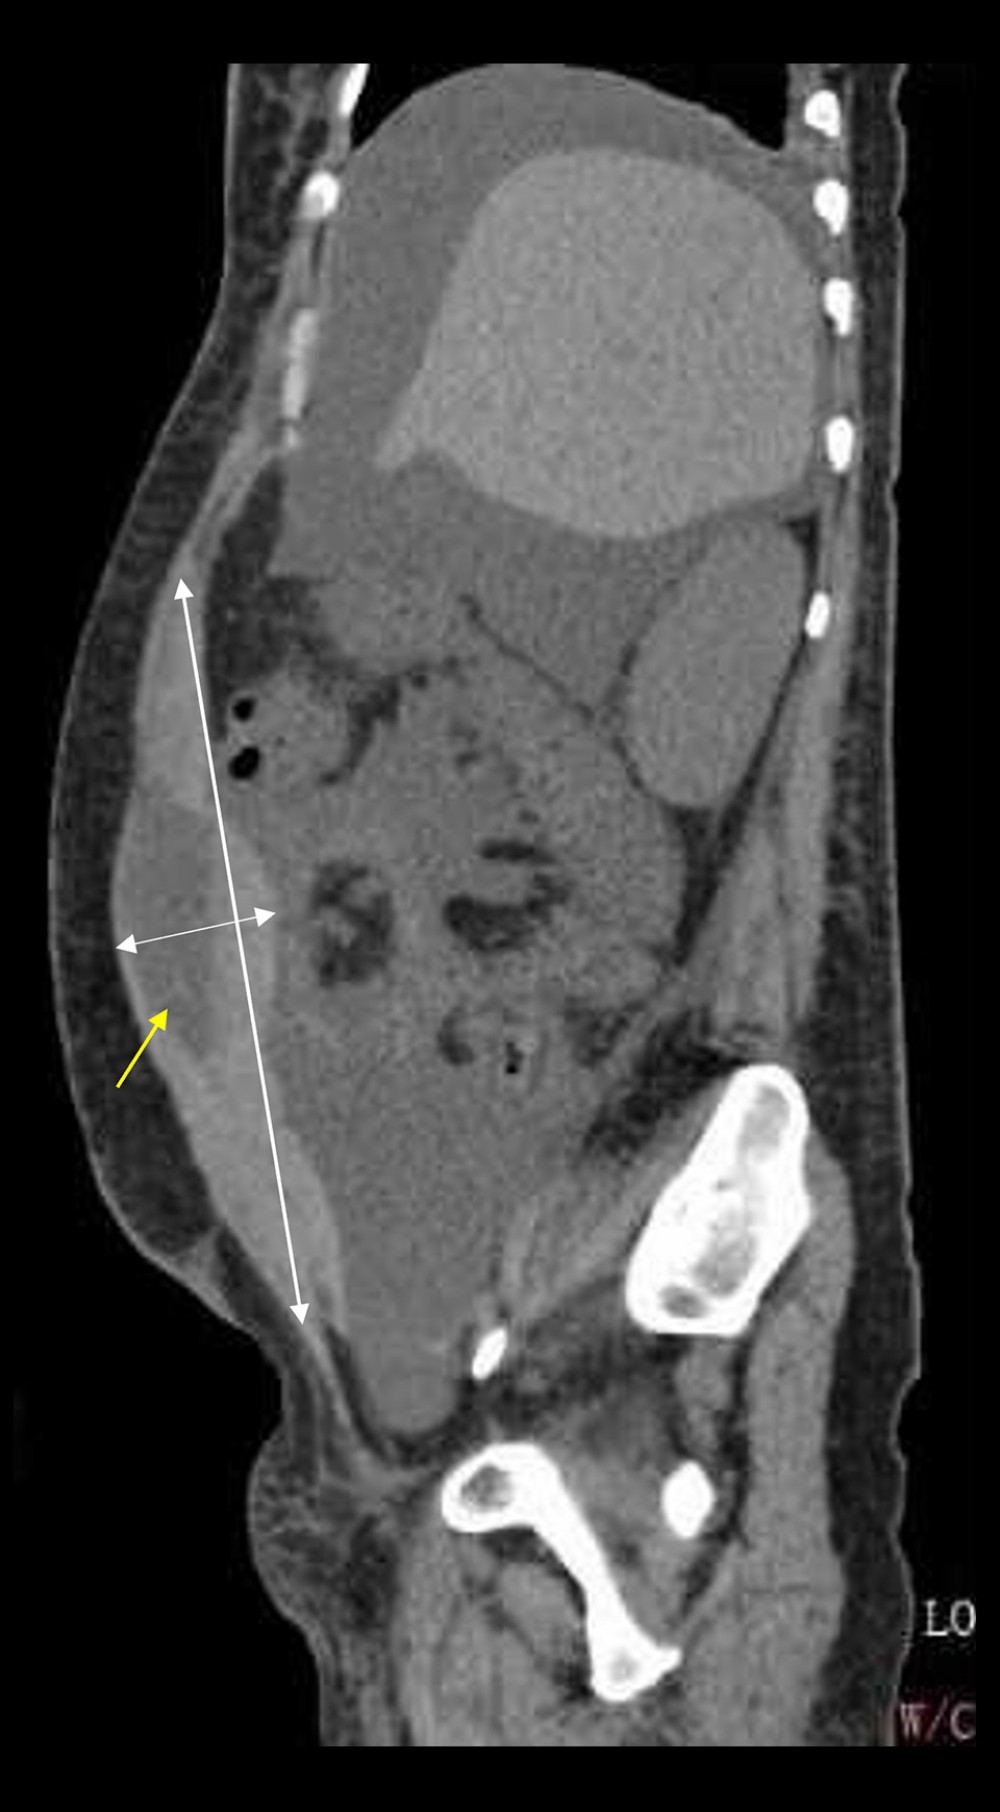 Pretreatment computed tomography (CT) imaging in a 28-year-old woman with a flare of systematic lupus erythematosus and abdominal pain. CT scan showing RSH (yellow arrow) that measured 21.4×4.7 cm, massive ascites, and edema of the abdomen wall and intestinal wall (before treatment).